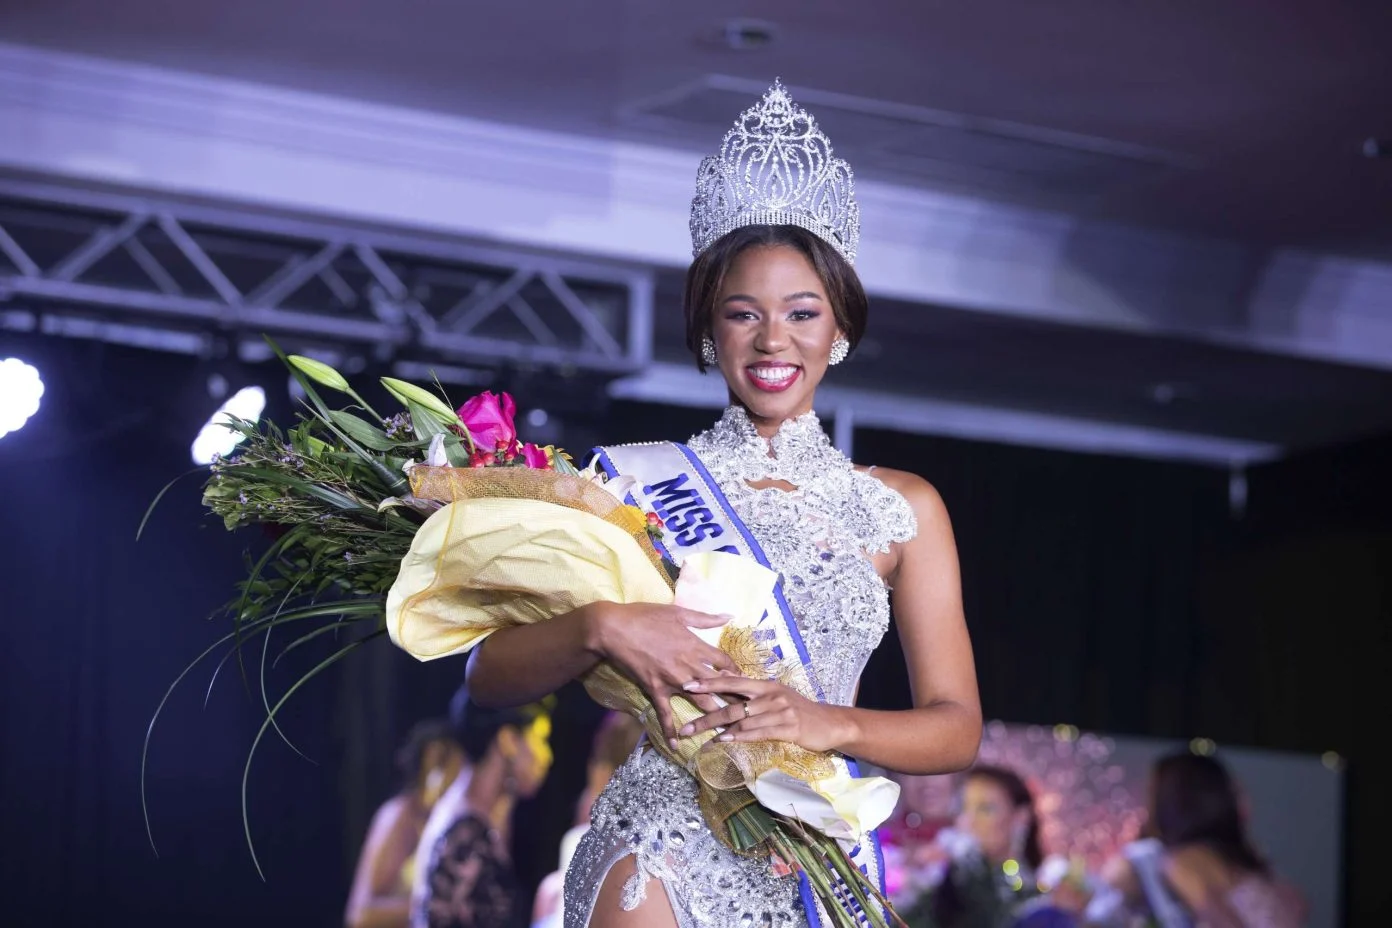 Newly crowned Miss Cayman Islands Universe barred from Miss Universe because of court?